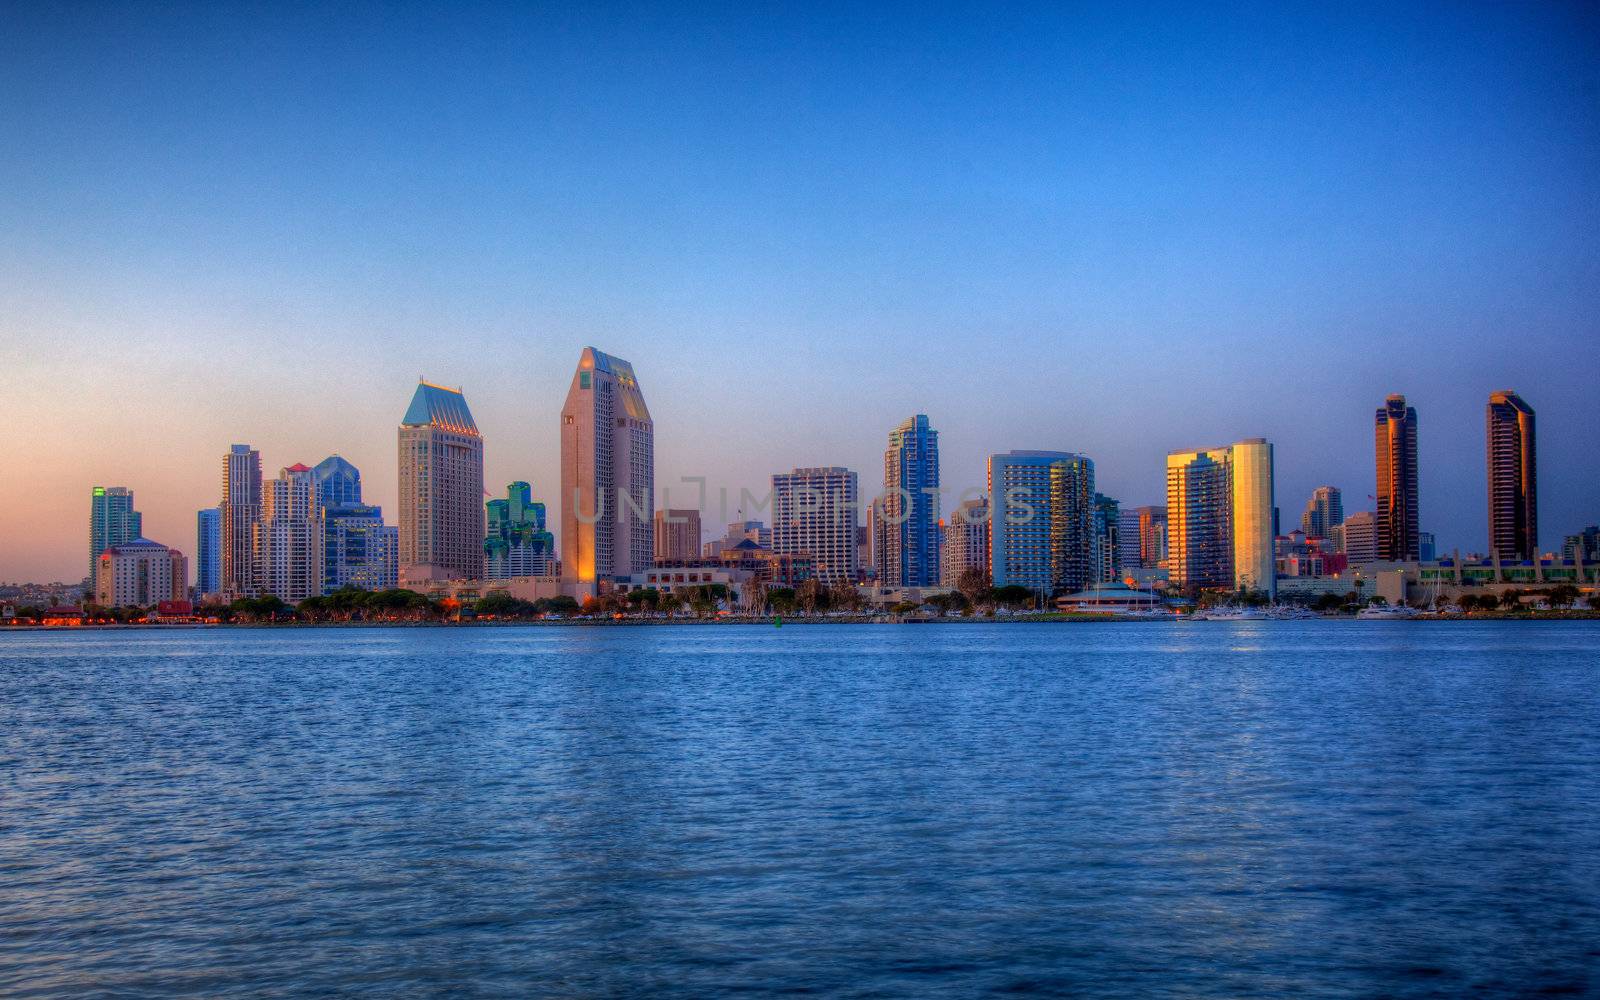 San Diego skyline on clear evening in HDR by steheap